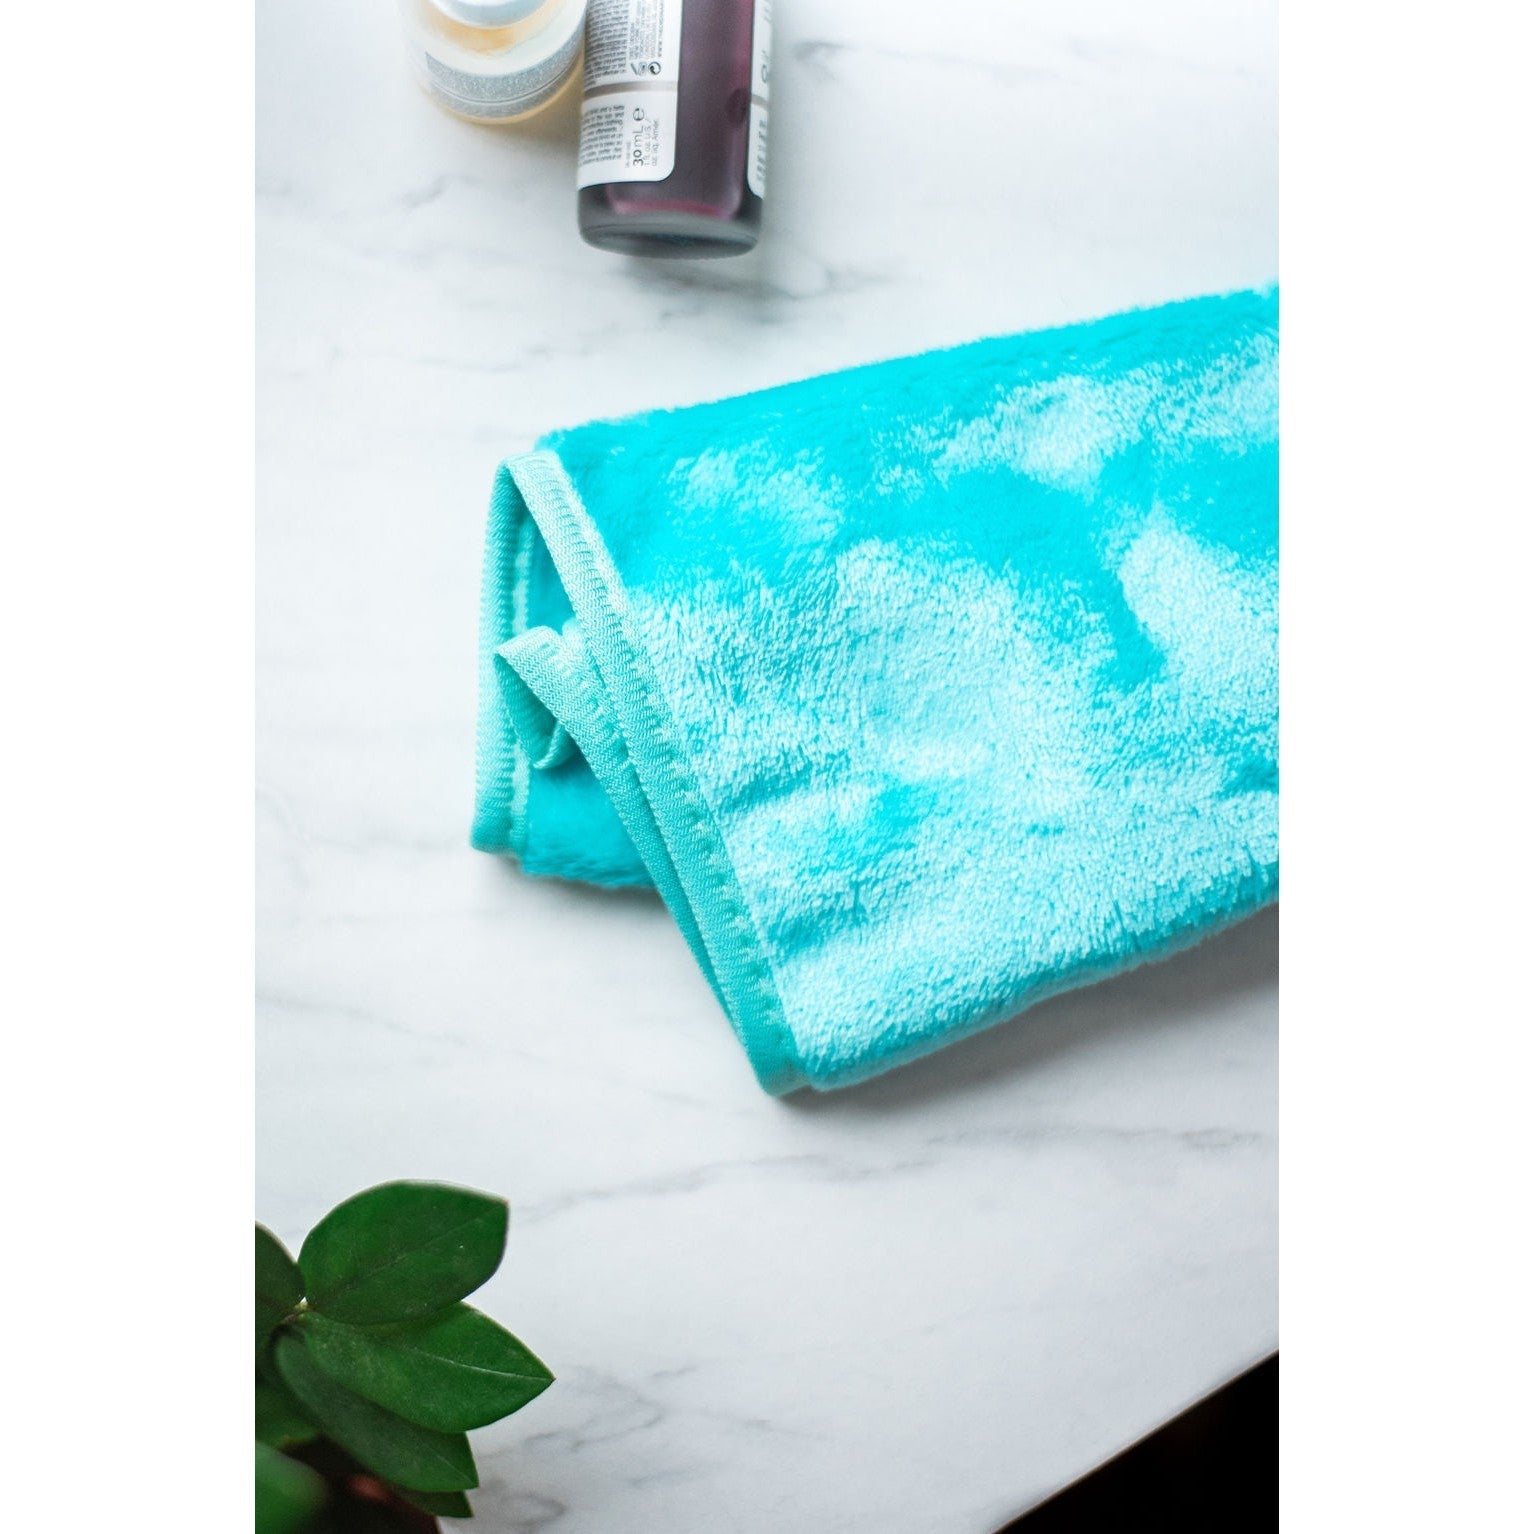 Wash the Day Away- Makeup Remover Cloths